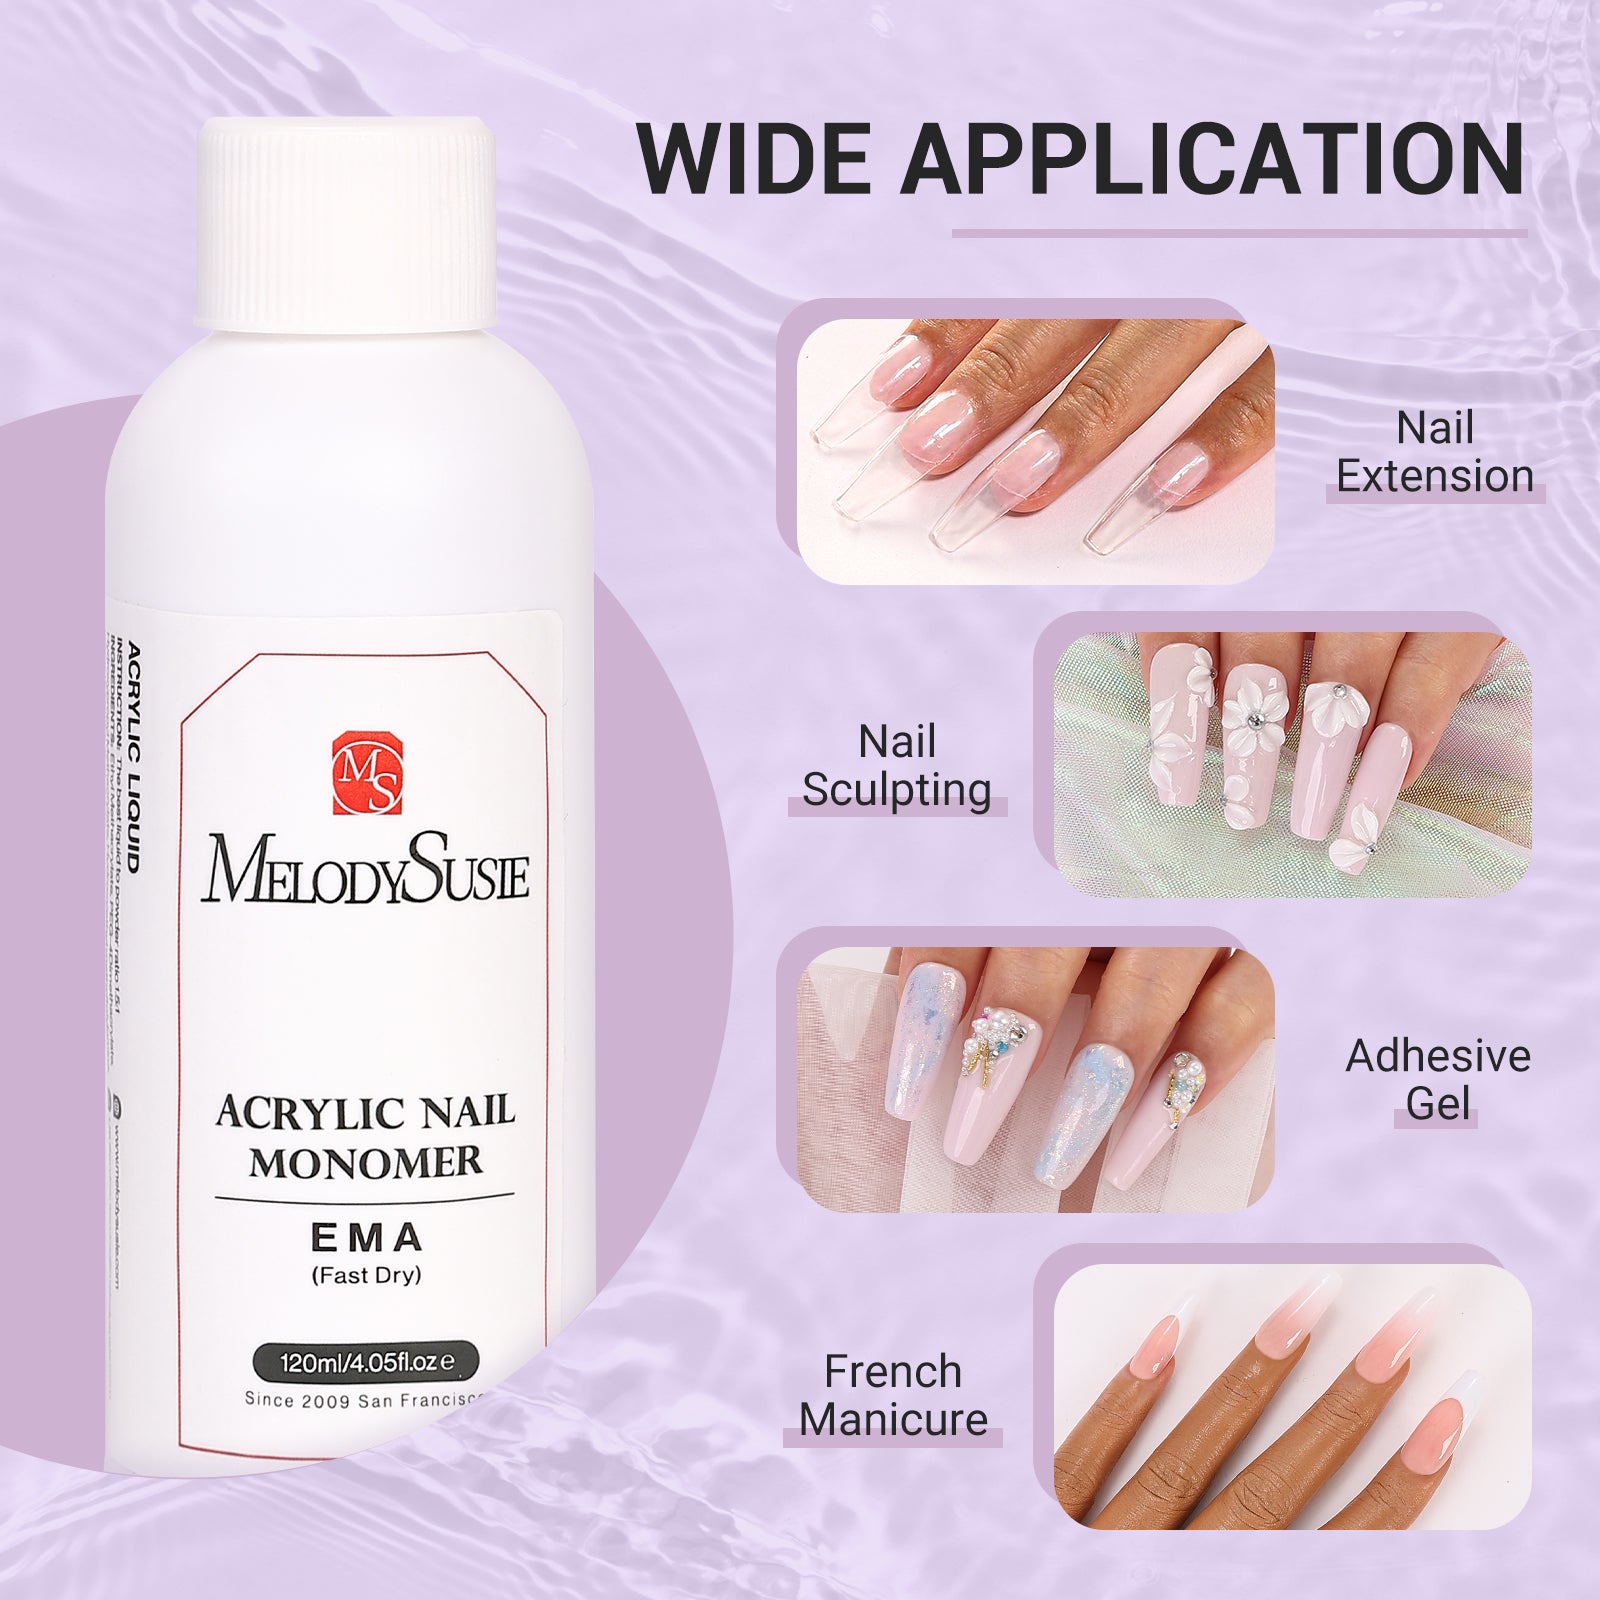 Amazon.com: Morovan Monomer Acrylic Nail Liquid 4 oz: Acrylic Liquid Monomer  for Acrylic Powder Acrylic Nail Extension with Acrylic Brush for Beginners  DIY at home Non-Yellowing : Beauty & Personal Care